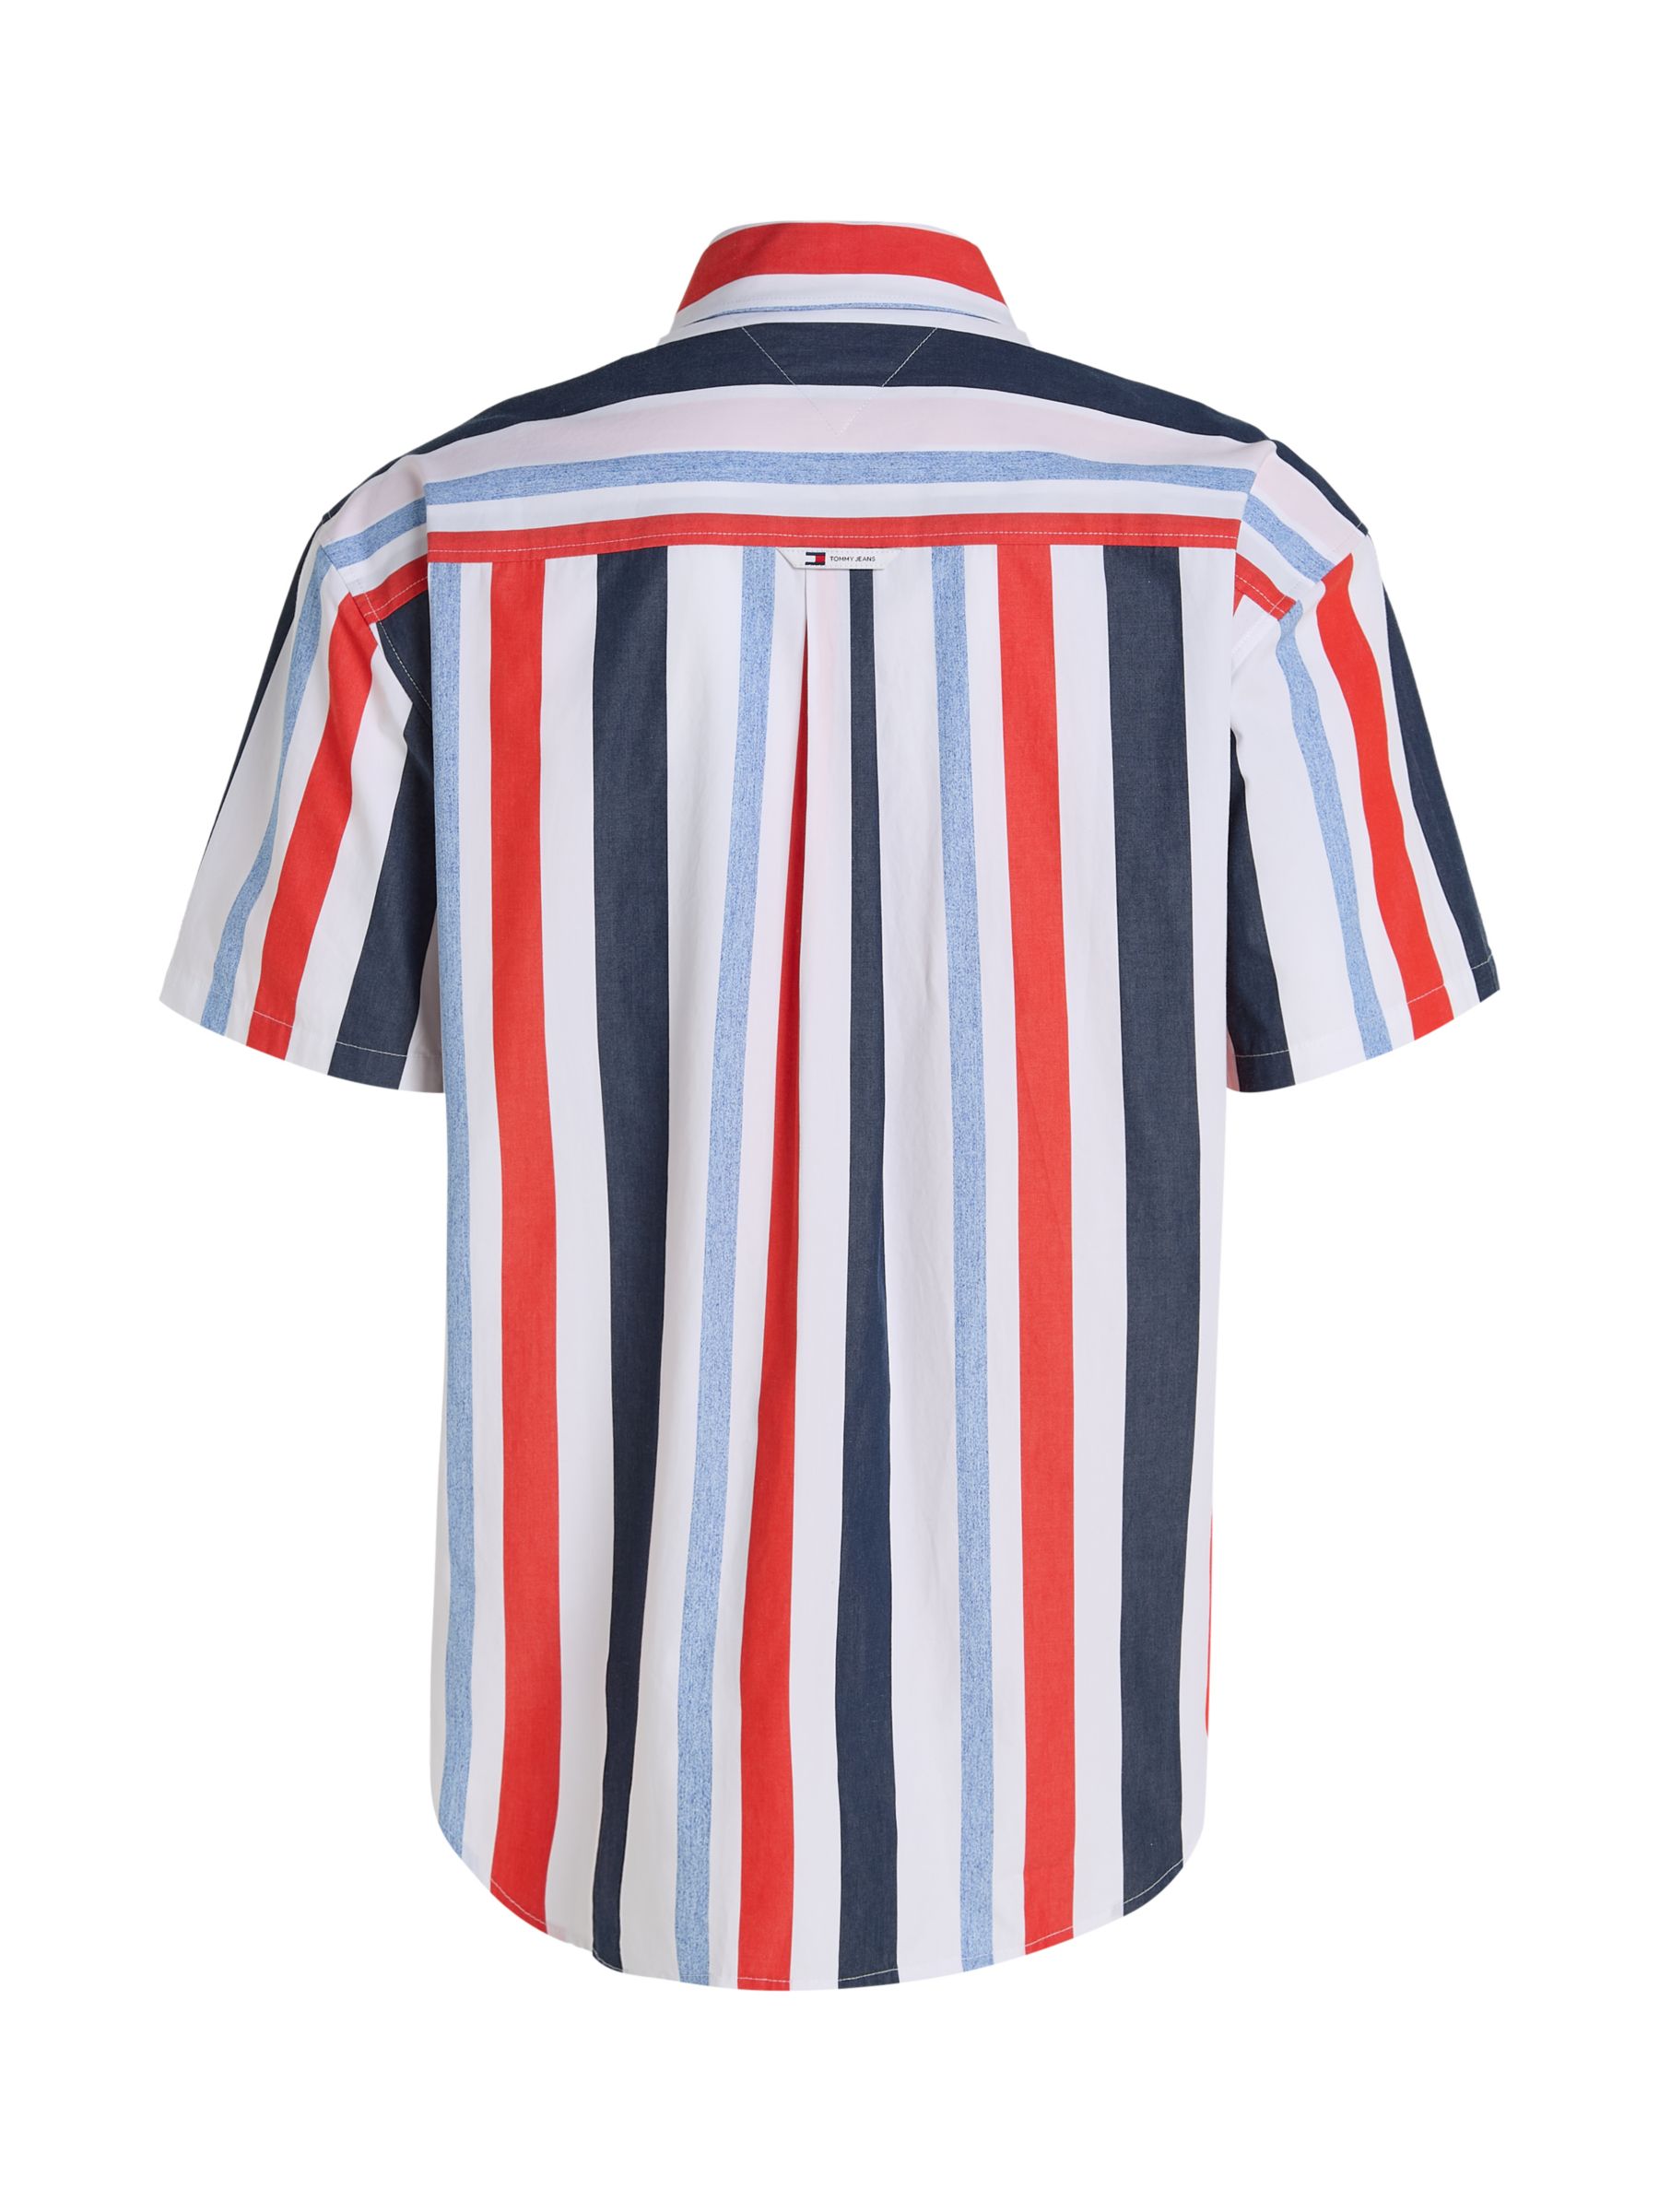 Tommy Jeans Relaxed Stripe T-Shirt, Multi, M